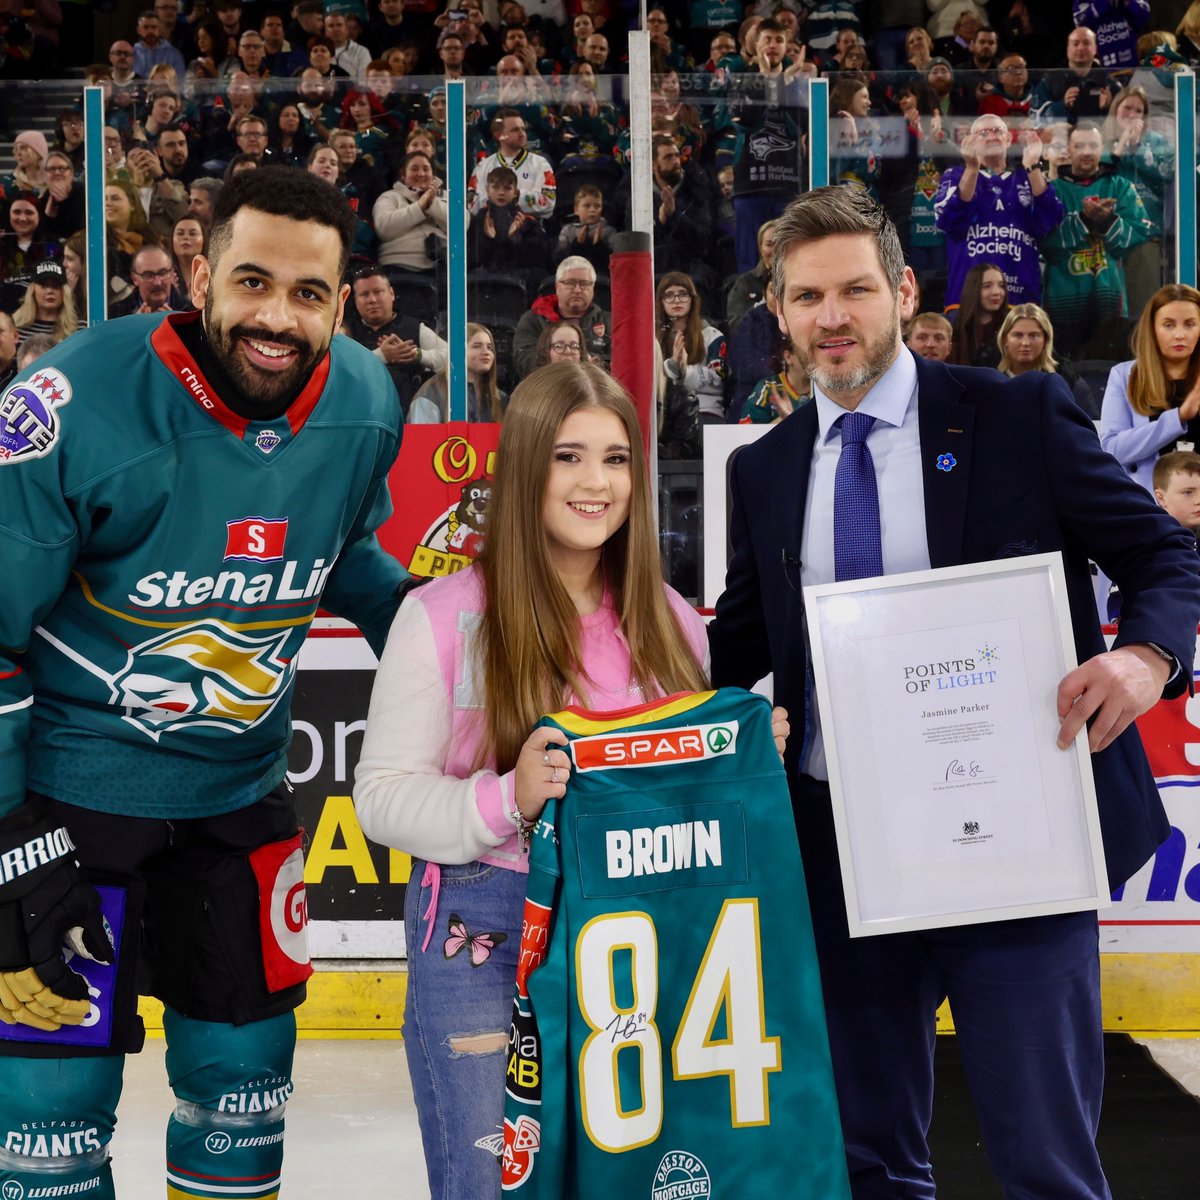 Congratulations to the incredible Jasmine Parker, who is the recipient of the Prime Minister's Points of Light Award, having collected & donated over 6,000 Easter eggs to children in hospitals across Northern Ireland over the last six years. 👏 #WeAreGiants #GiantsTogether